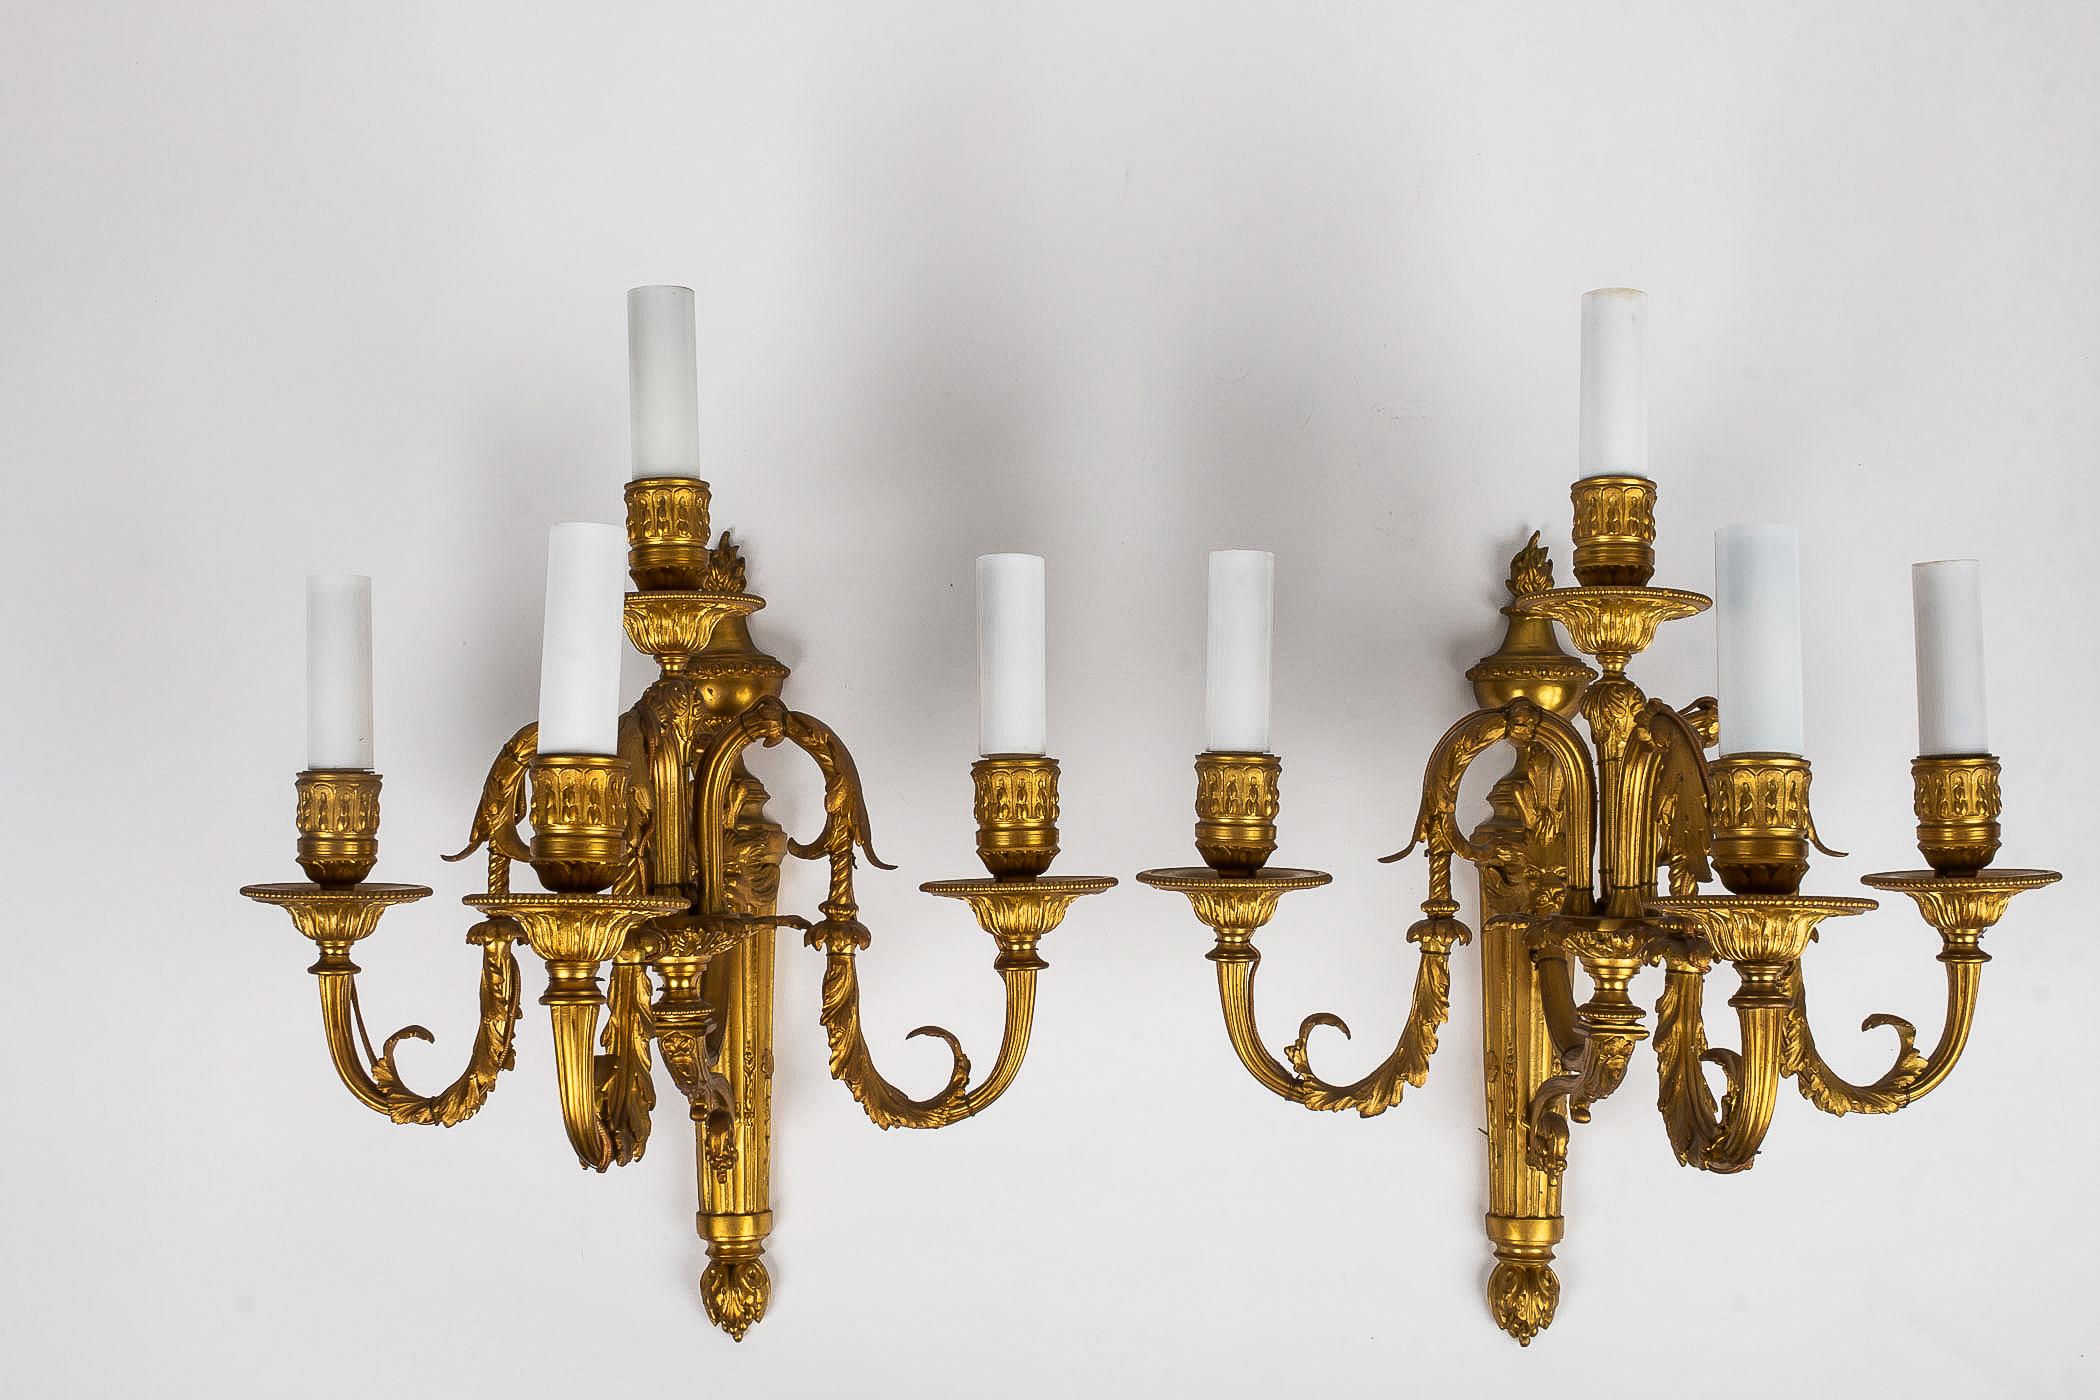 French Louis XVI style, pair of small chiseled ormolu sconces, circa 1880.

An elegant and decorative pair of four arm-lights finely chiseled ormolu sconces, decorated with an urn, grooves and Acanthus leaves. 
Beautiful original gilding.